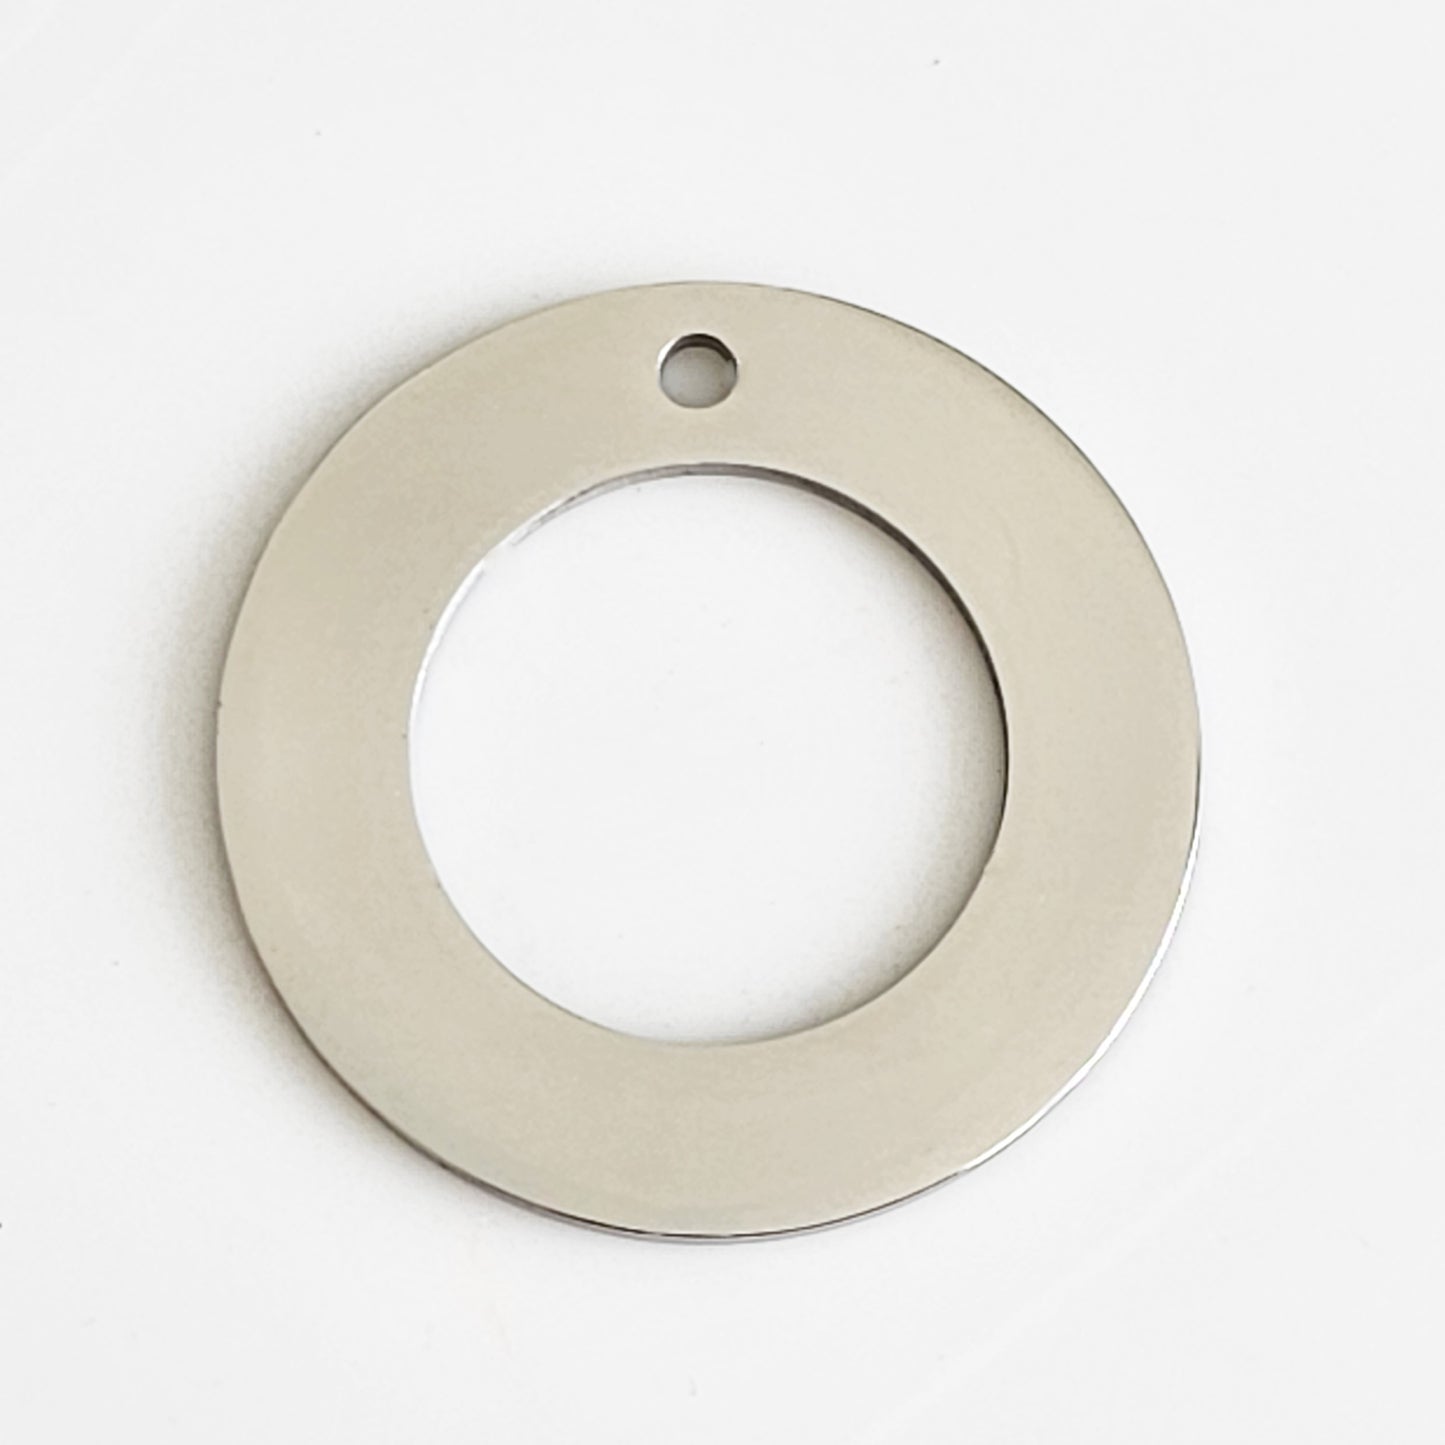 Stainless Steel - 1 1/4" Washer (with hole)